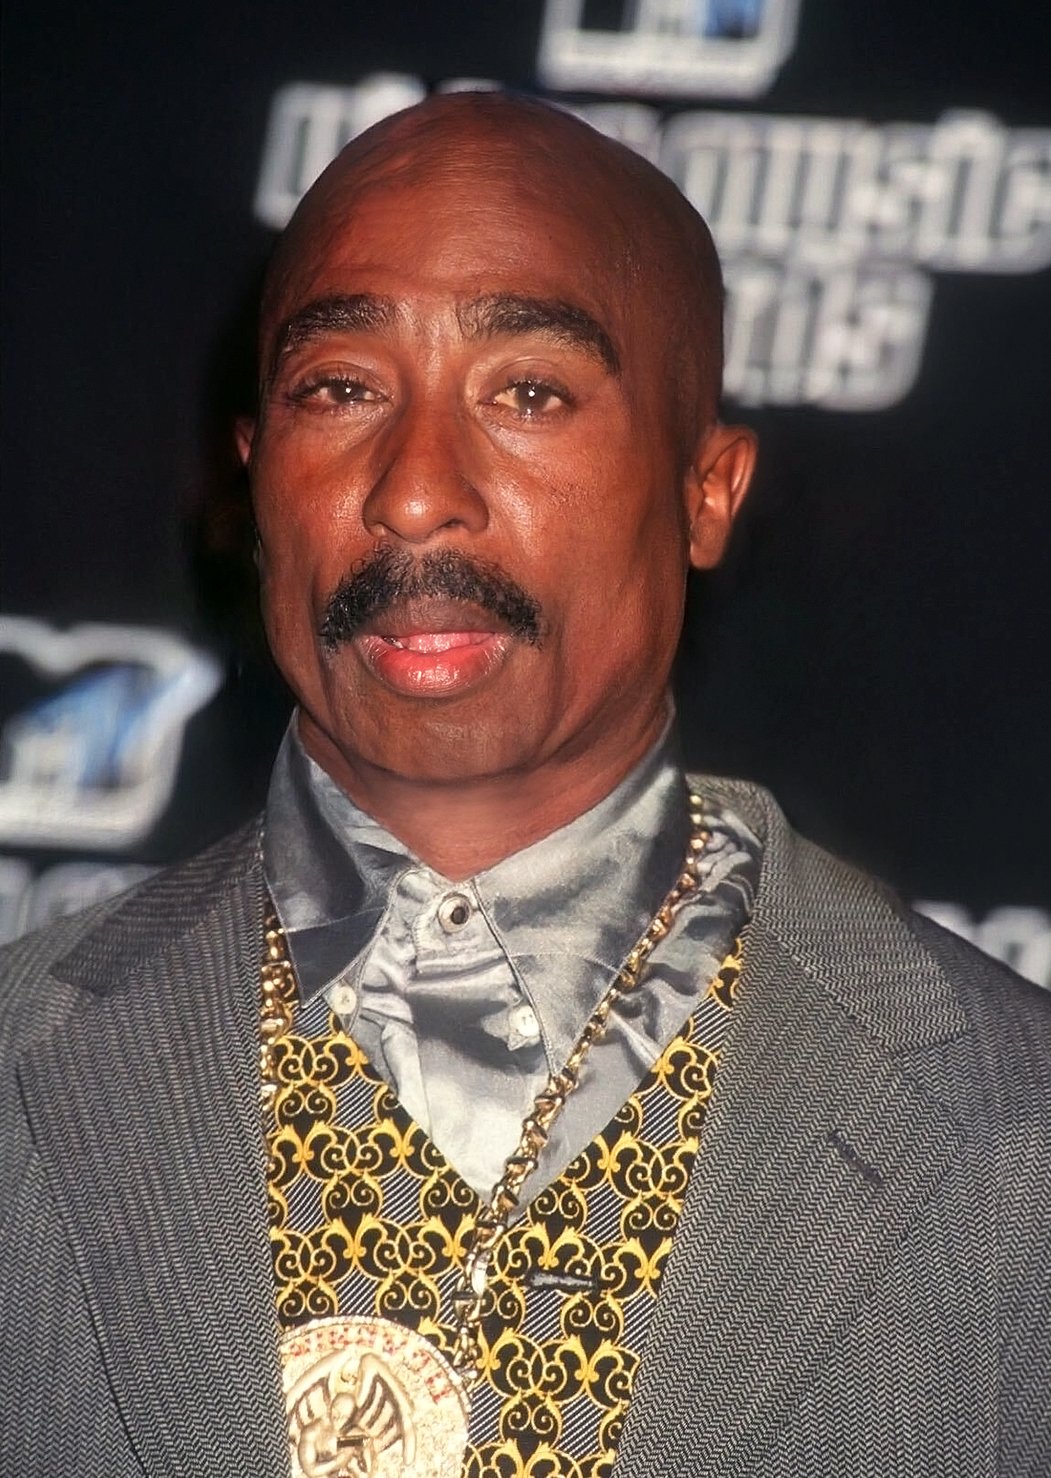 The older Tupac Shakur | Source: Getty Images